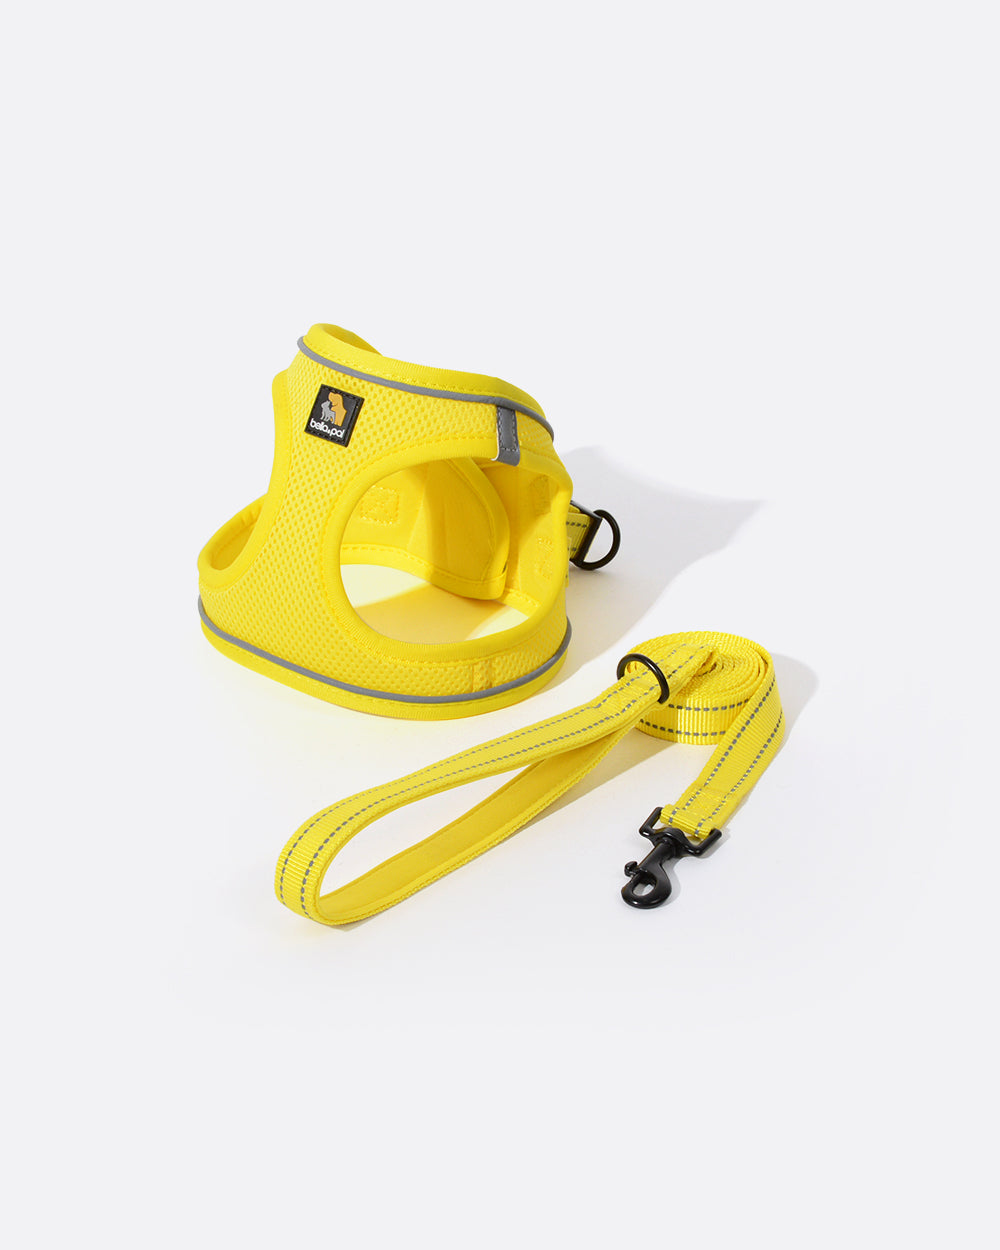 OxyMesh Step-in Harness and Leash Set - Lemon Yellow